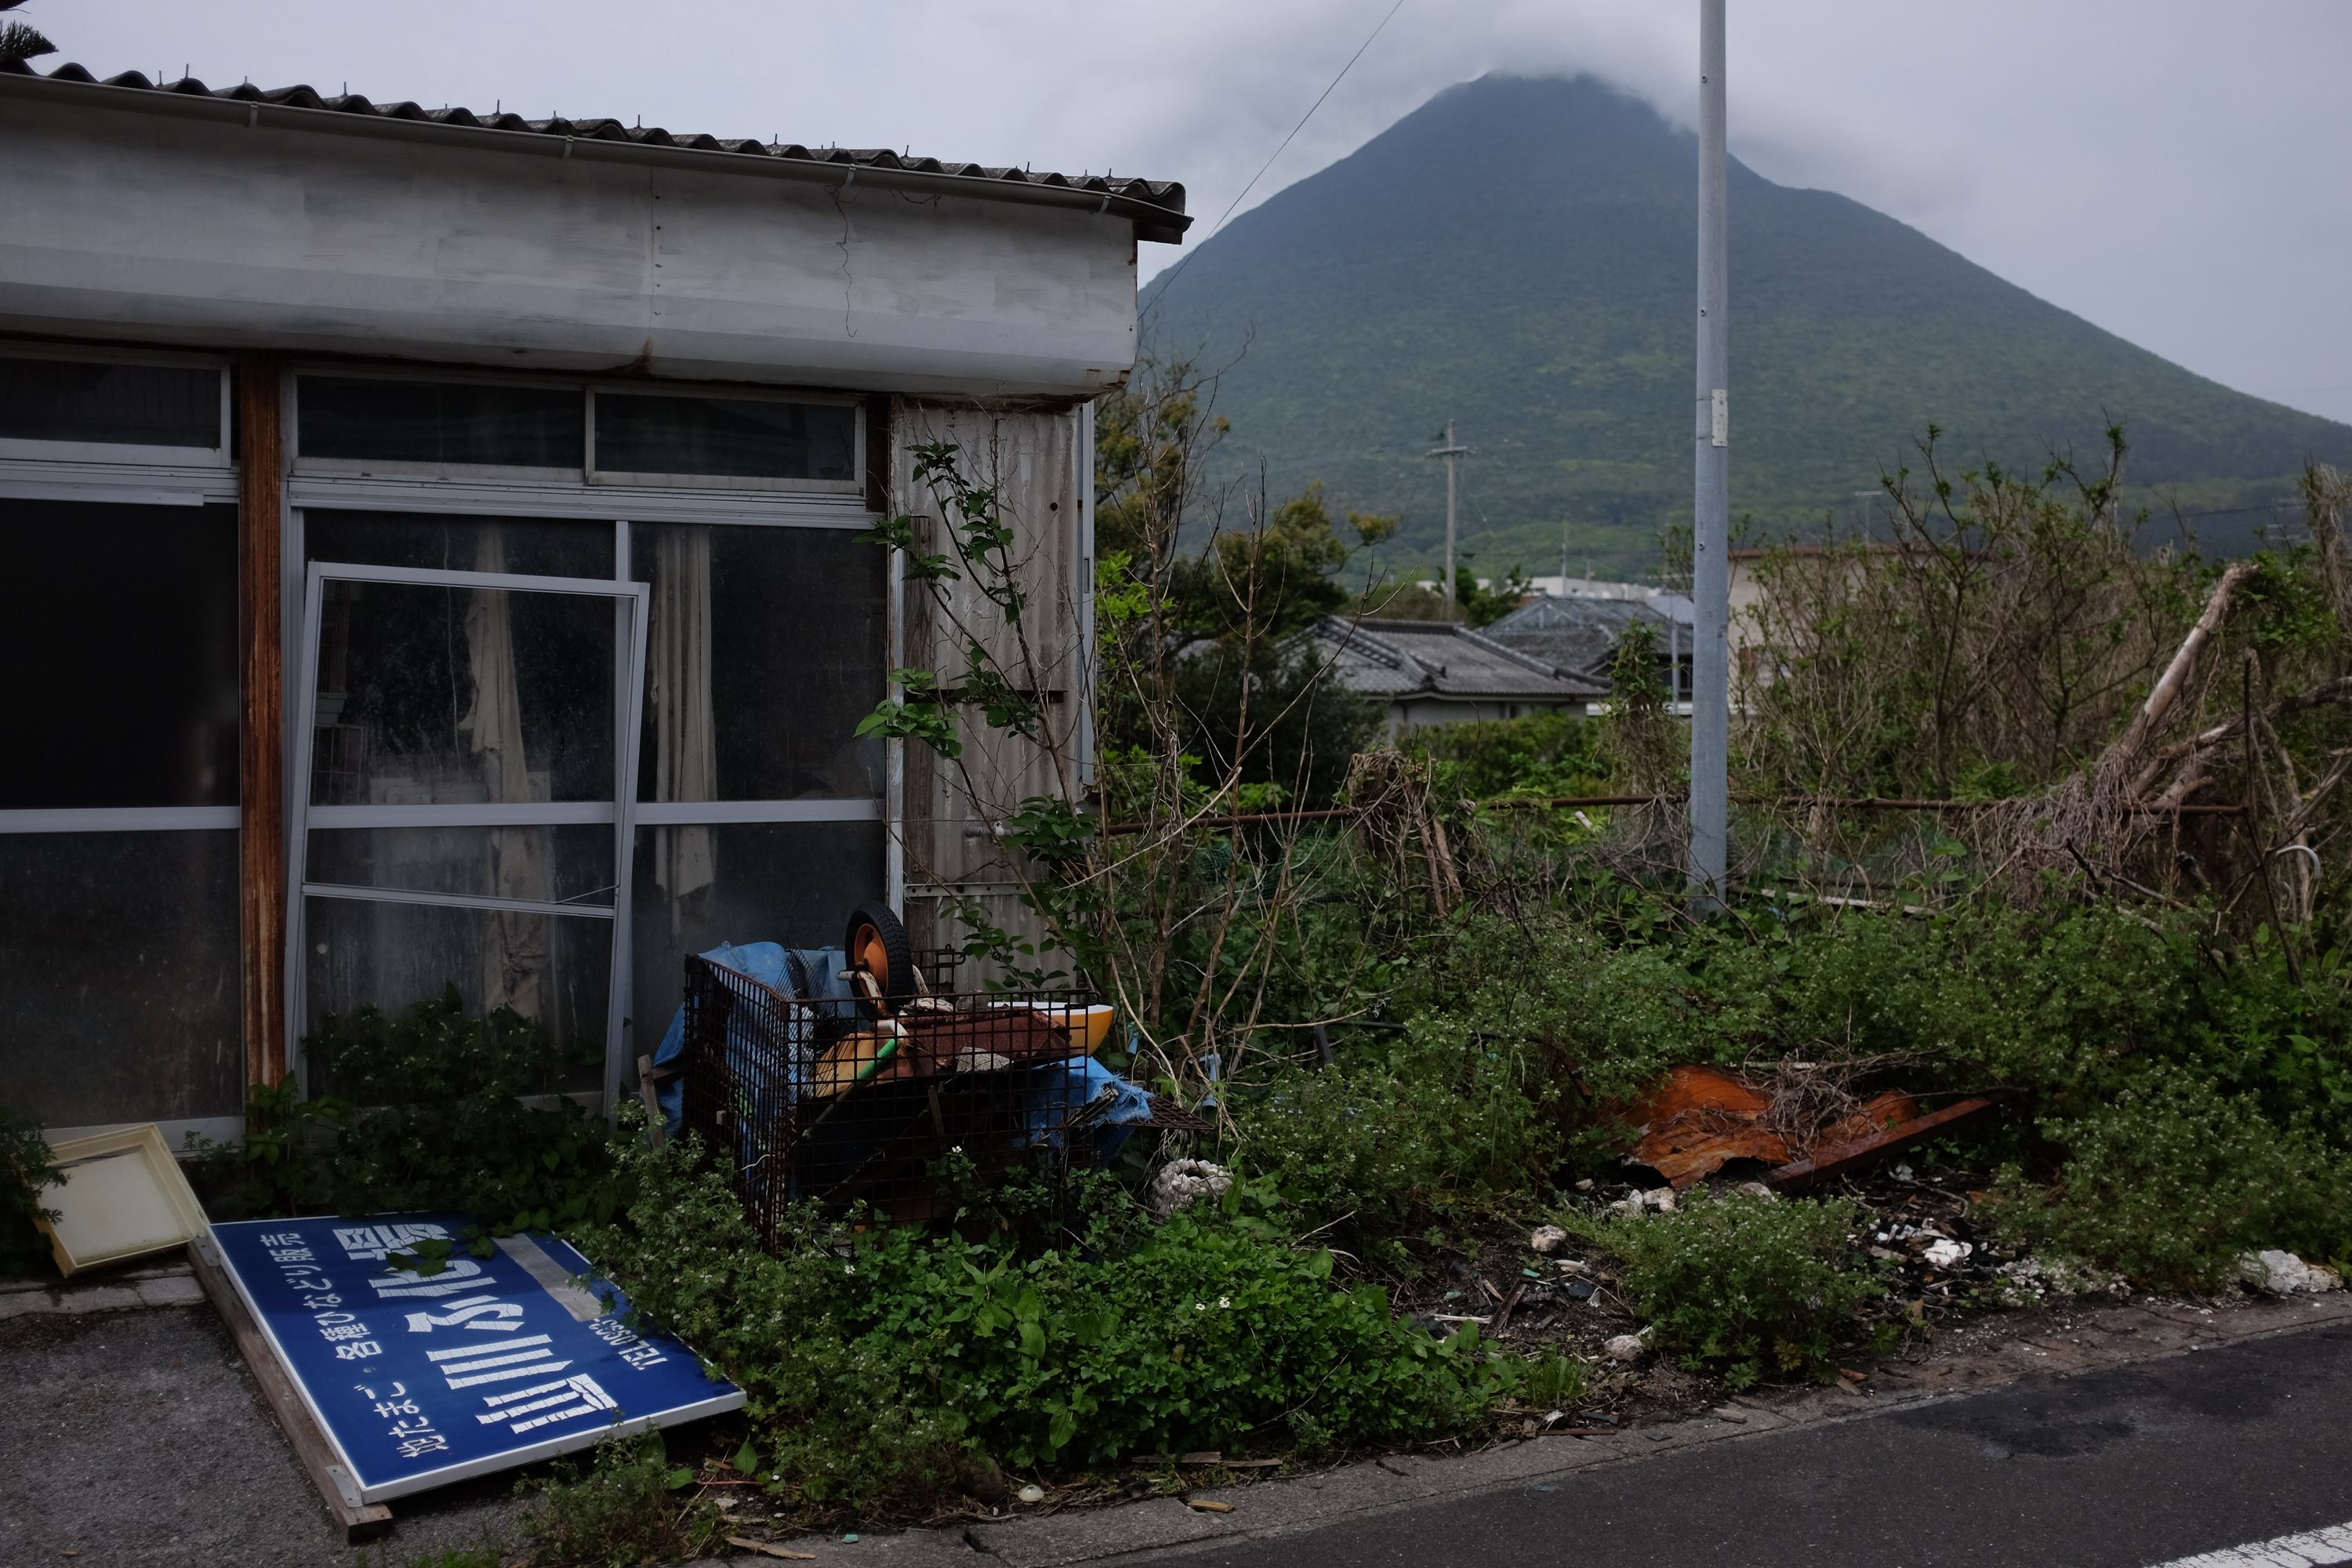 Mount Kaimon stands behind an abandoned house.